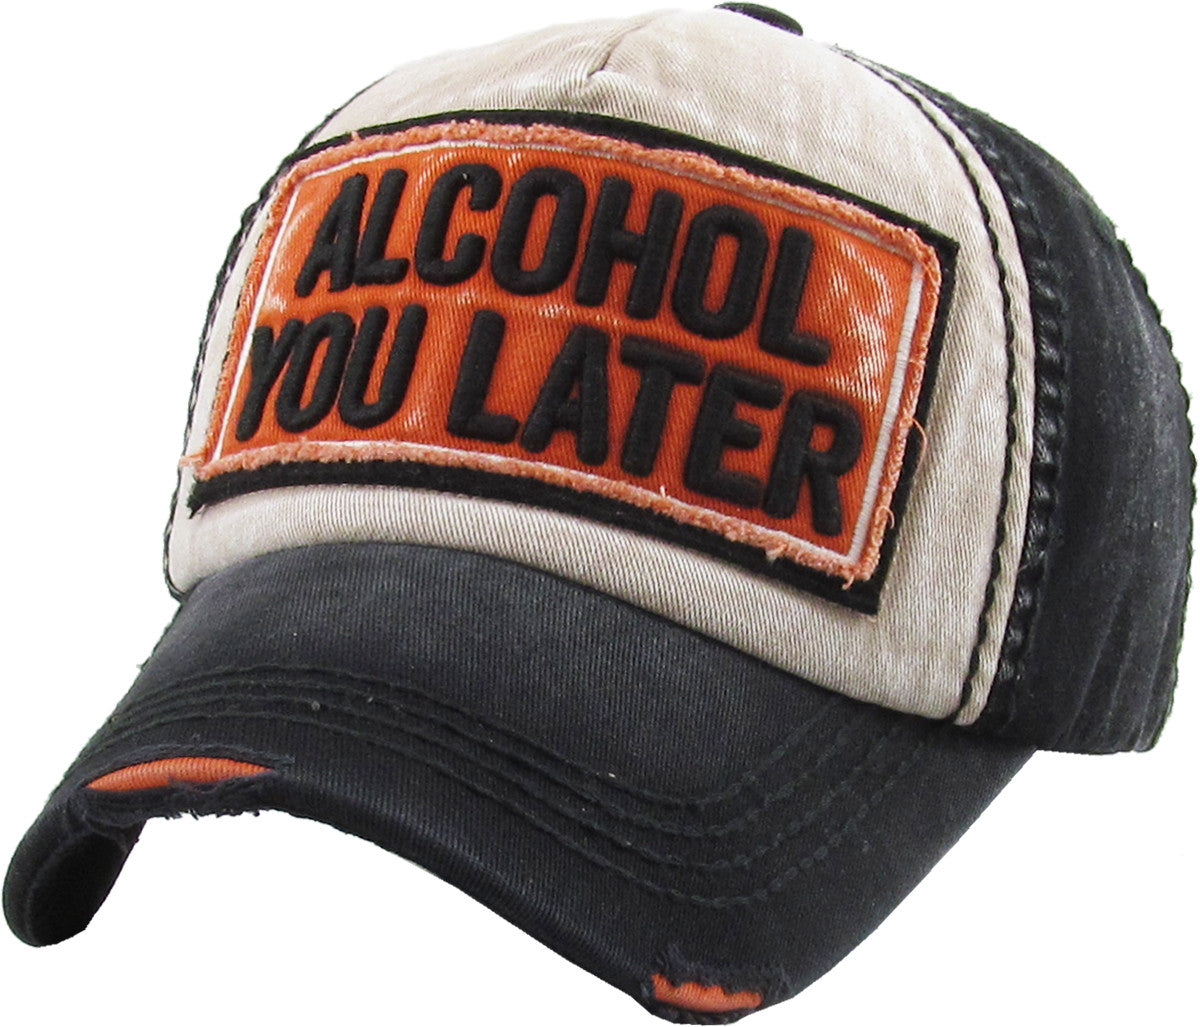 Alcohol You Later Vintage Hat - iNeedaHat.COM